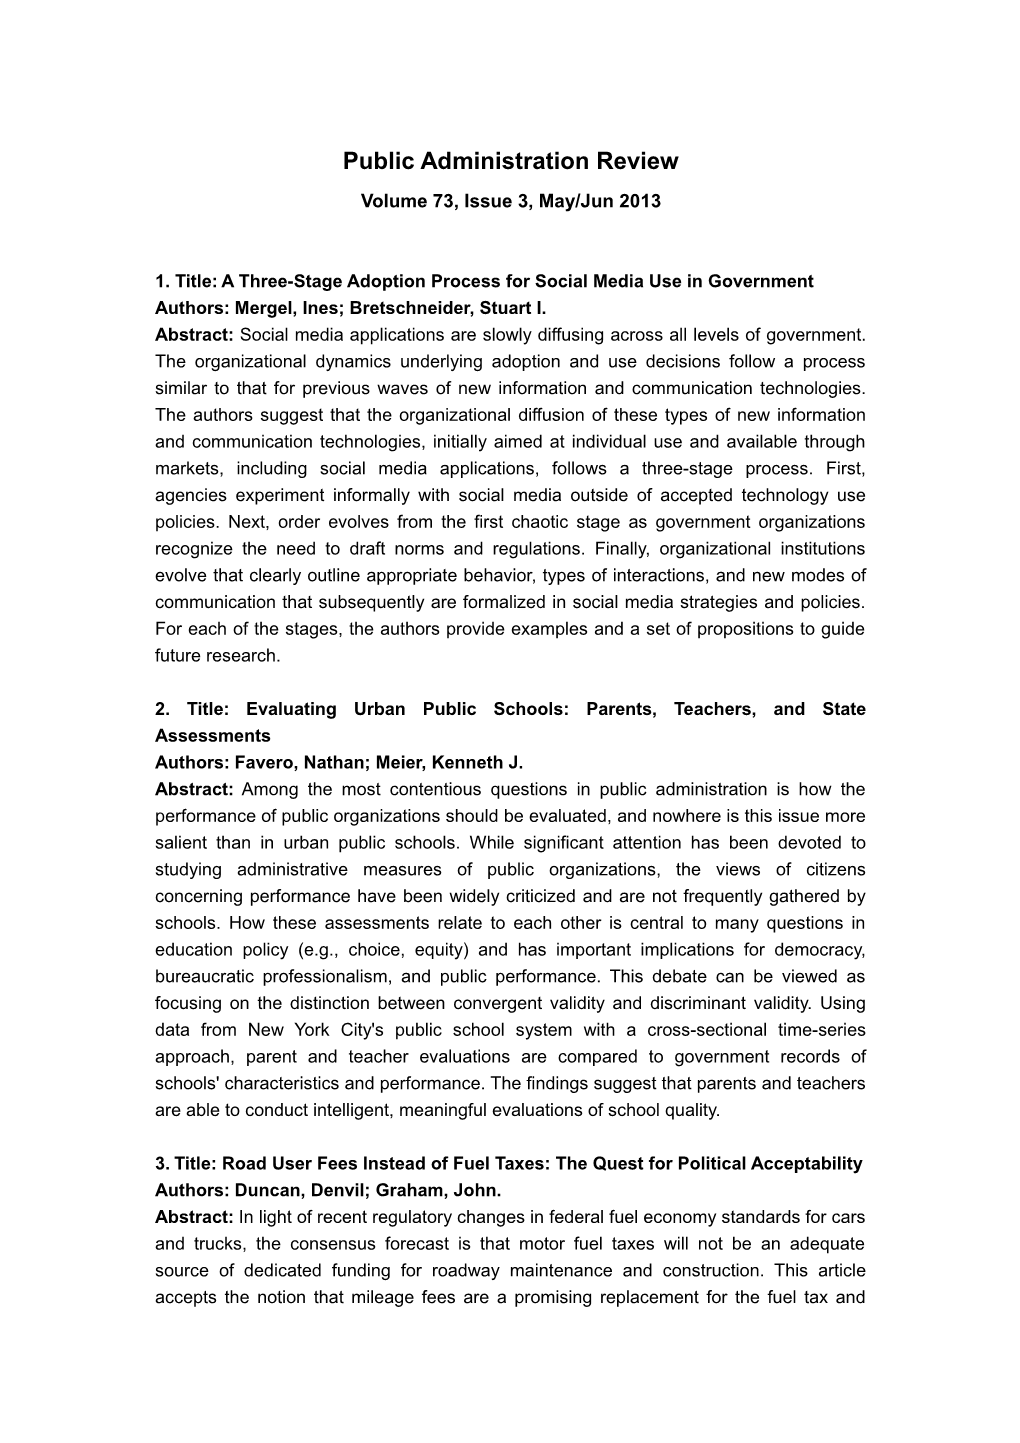 1. Title:A Three-Stage Adoption Process for Social Media Use in Government